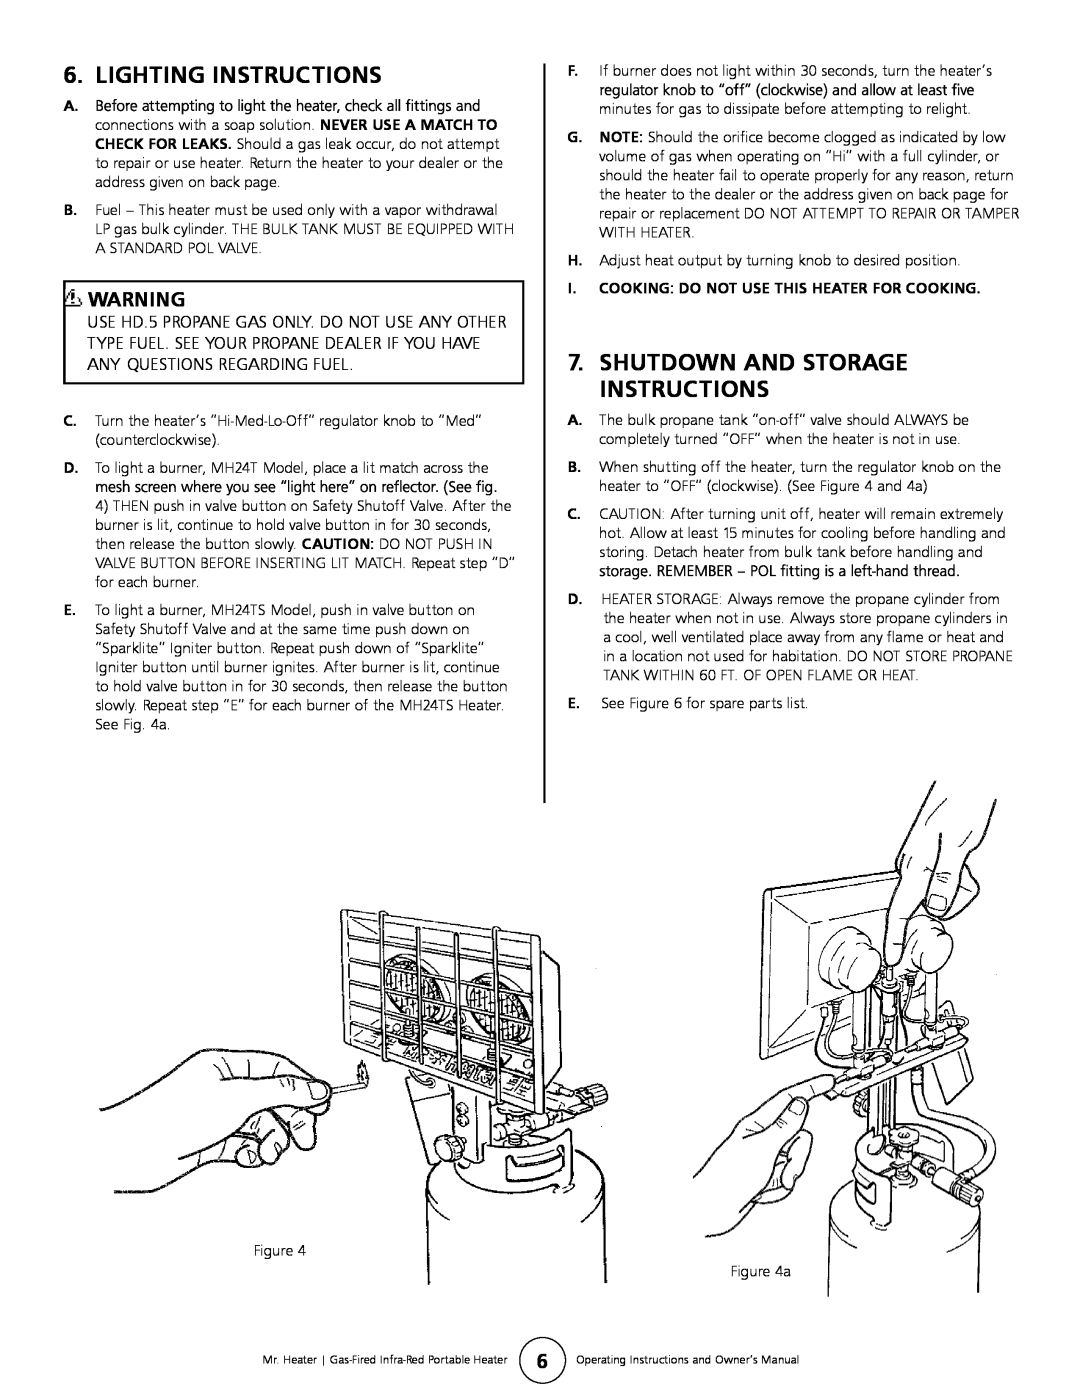 Mr. Heater MH24TS operating instructions Lighting Instructions, Shutdown And Storage Instructions 